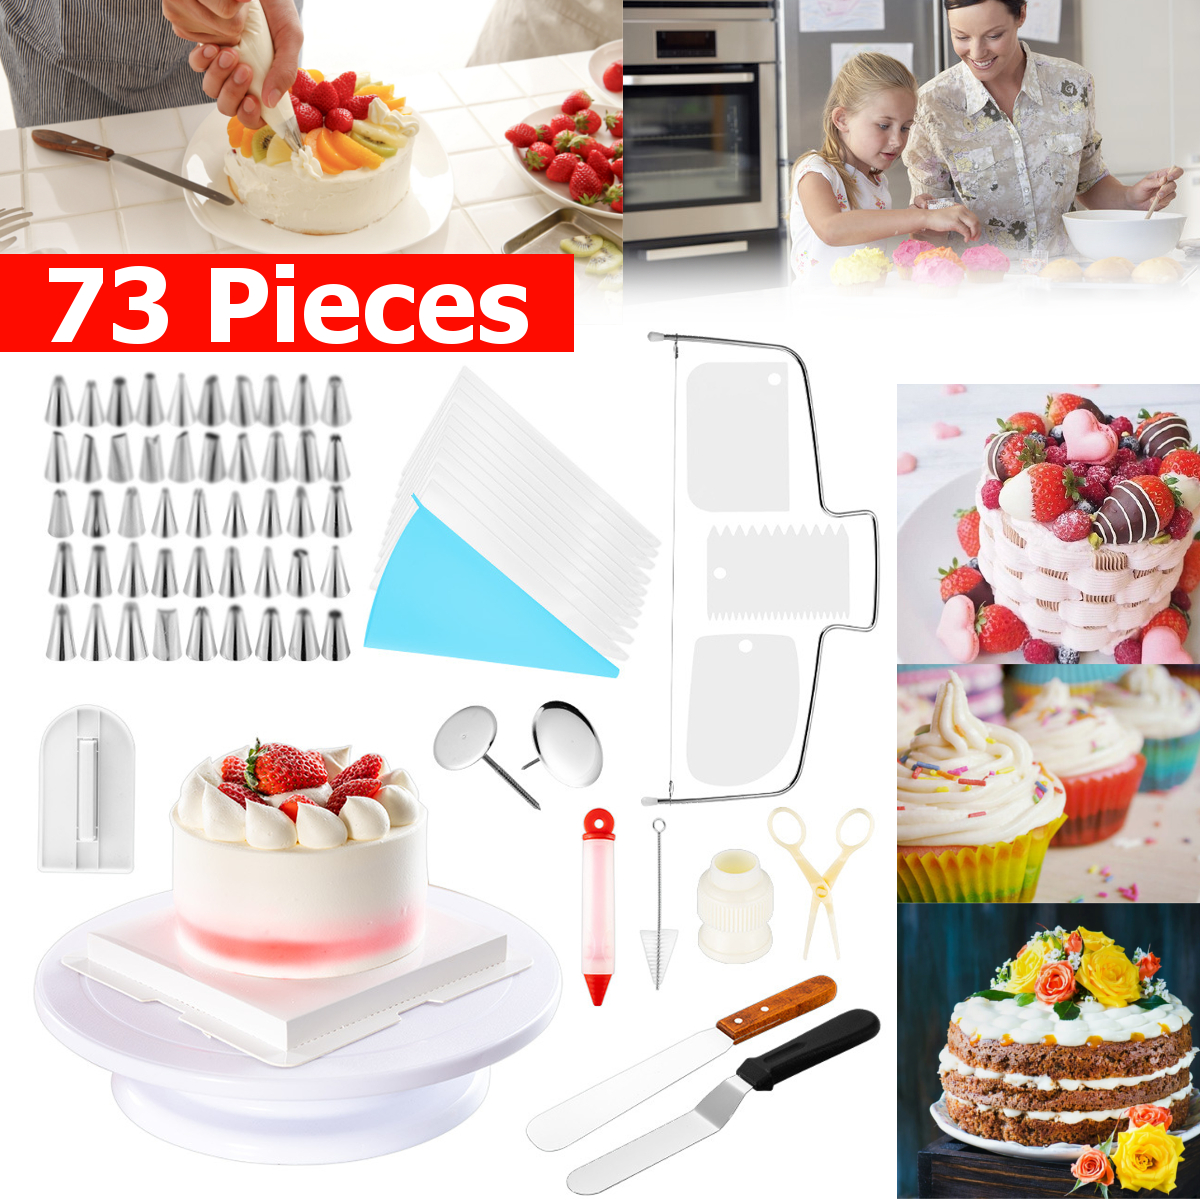 73-Pcs-Cake-Decorating-Sets-Stainless-Pastry-Nozzles-Cake-Turntable-Sets-Confectionery-Bag-Baking-To-1798298-1